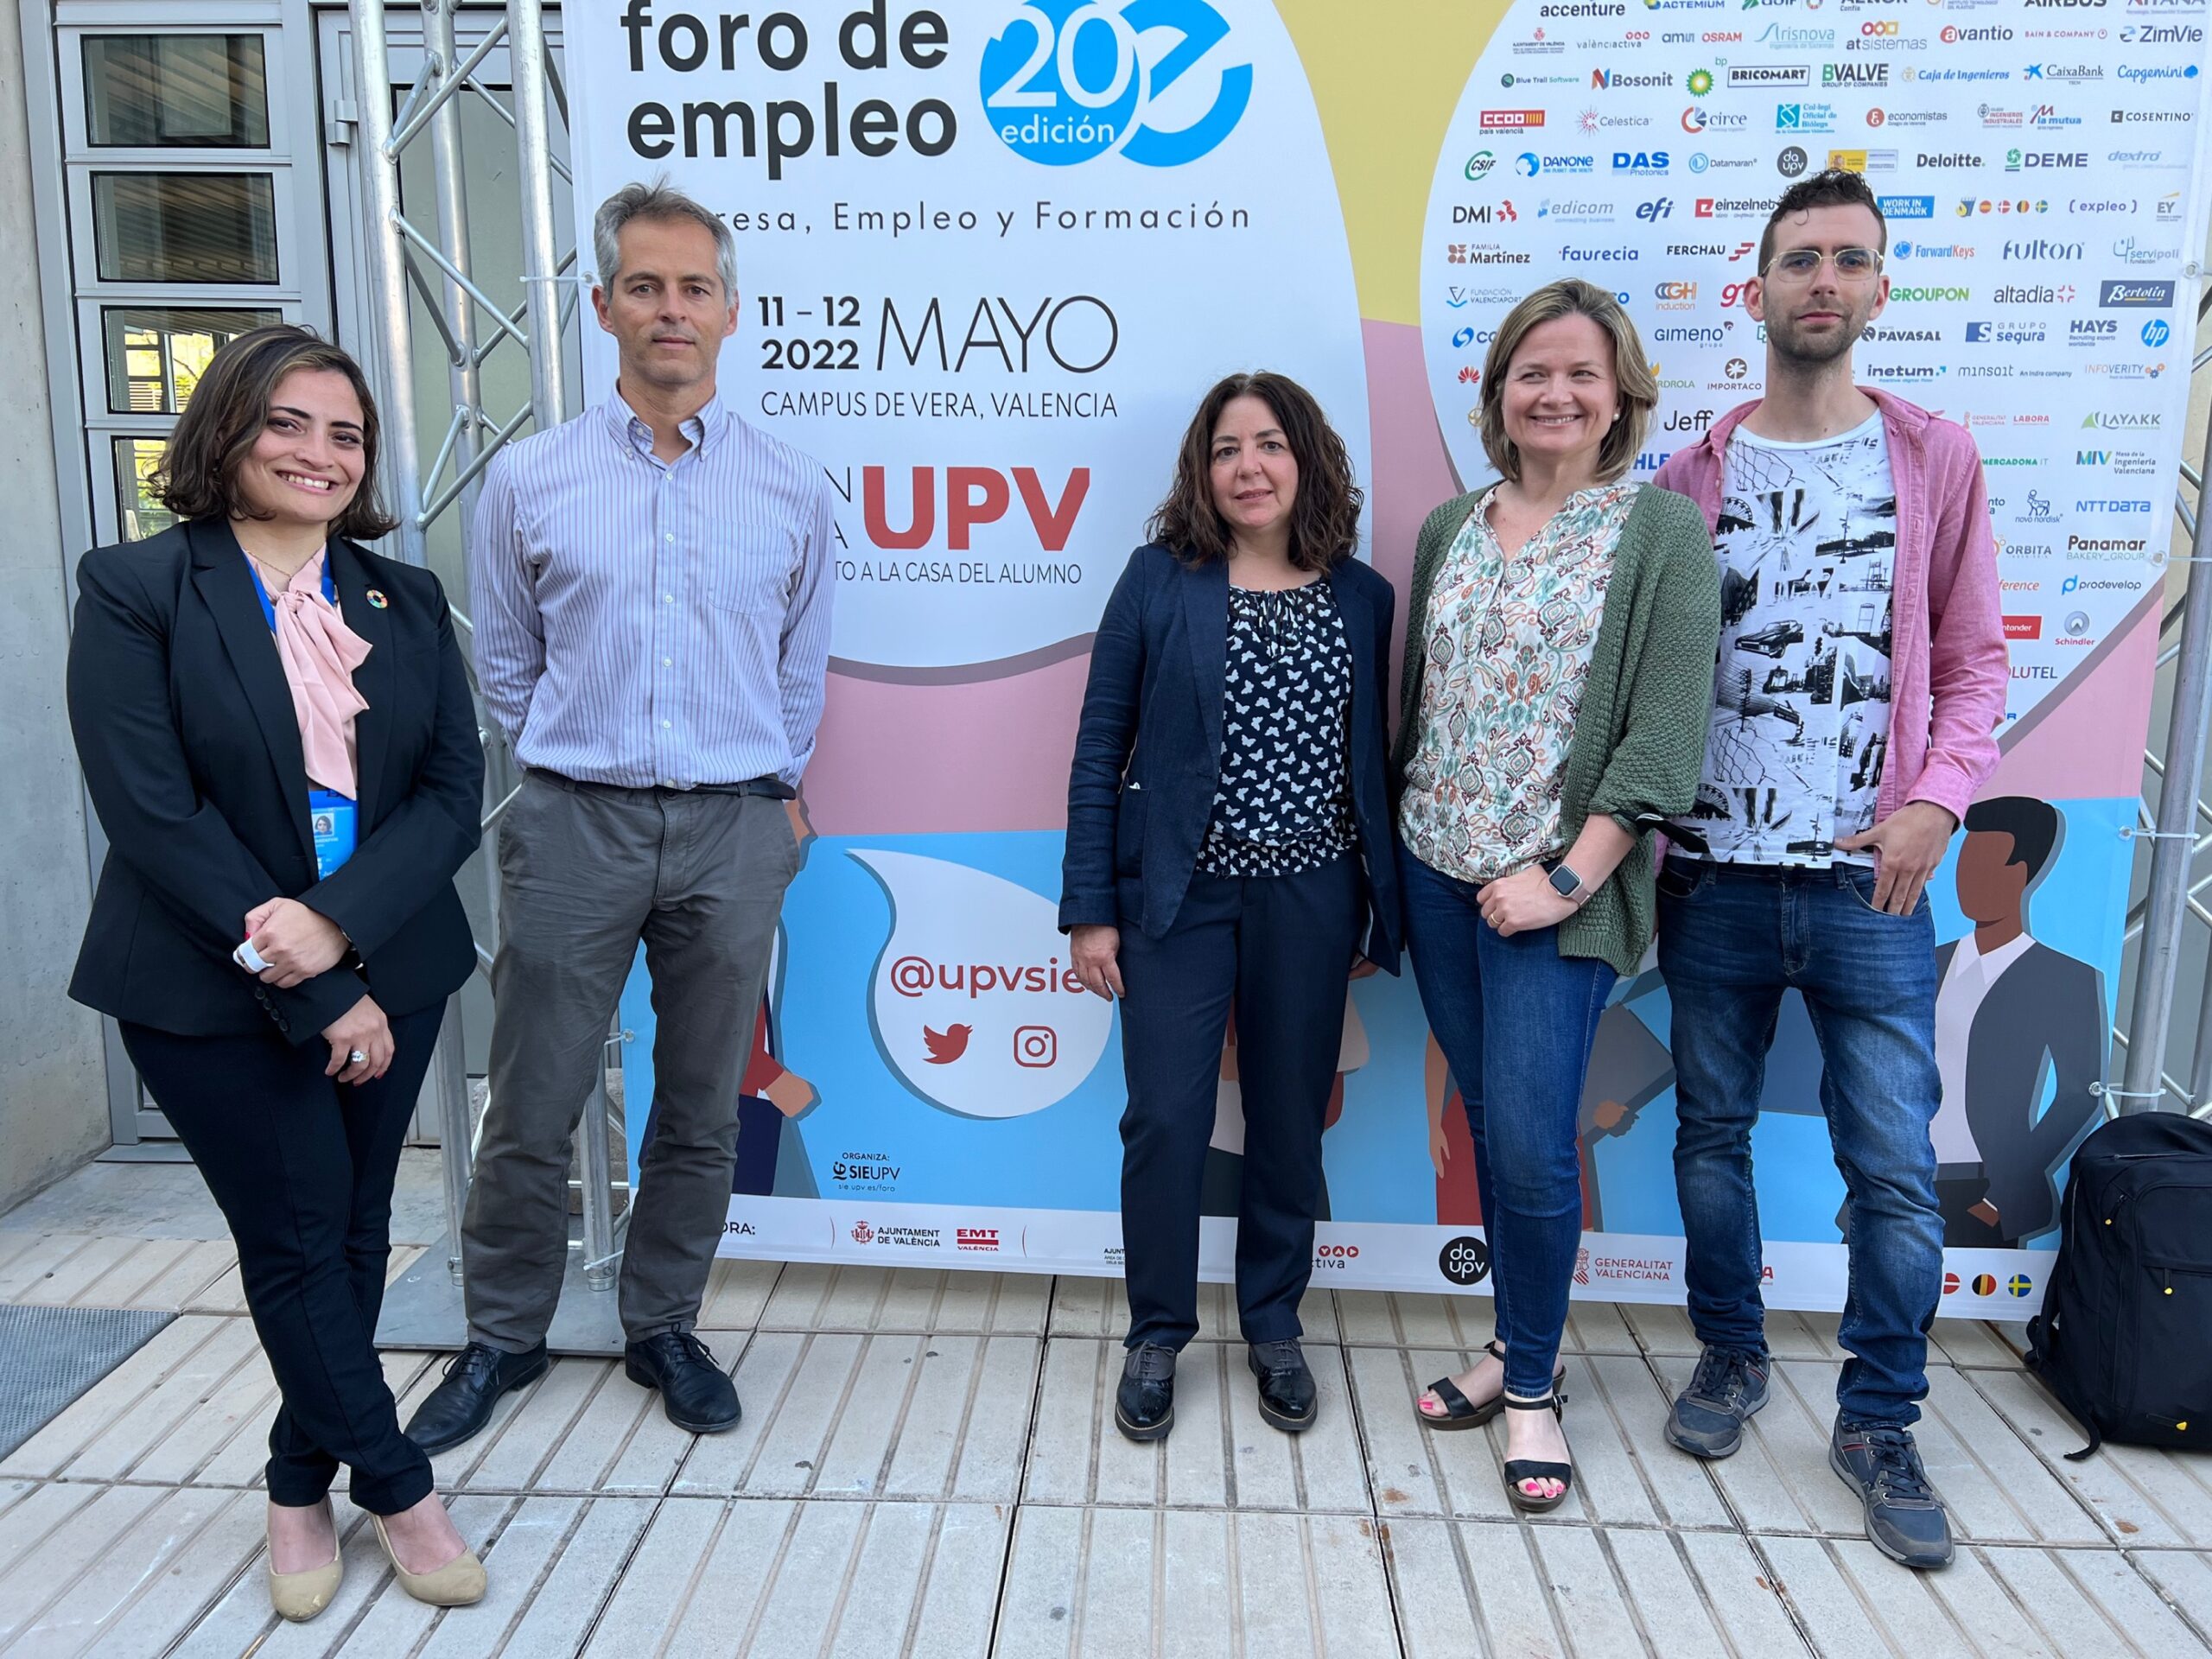 UNICC and UPV members standing in front of Foro E event banner